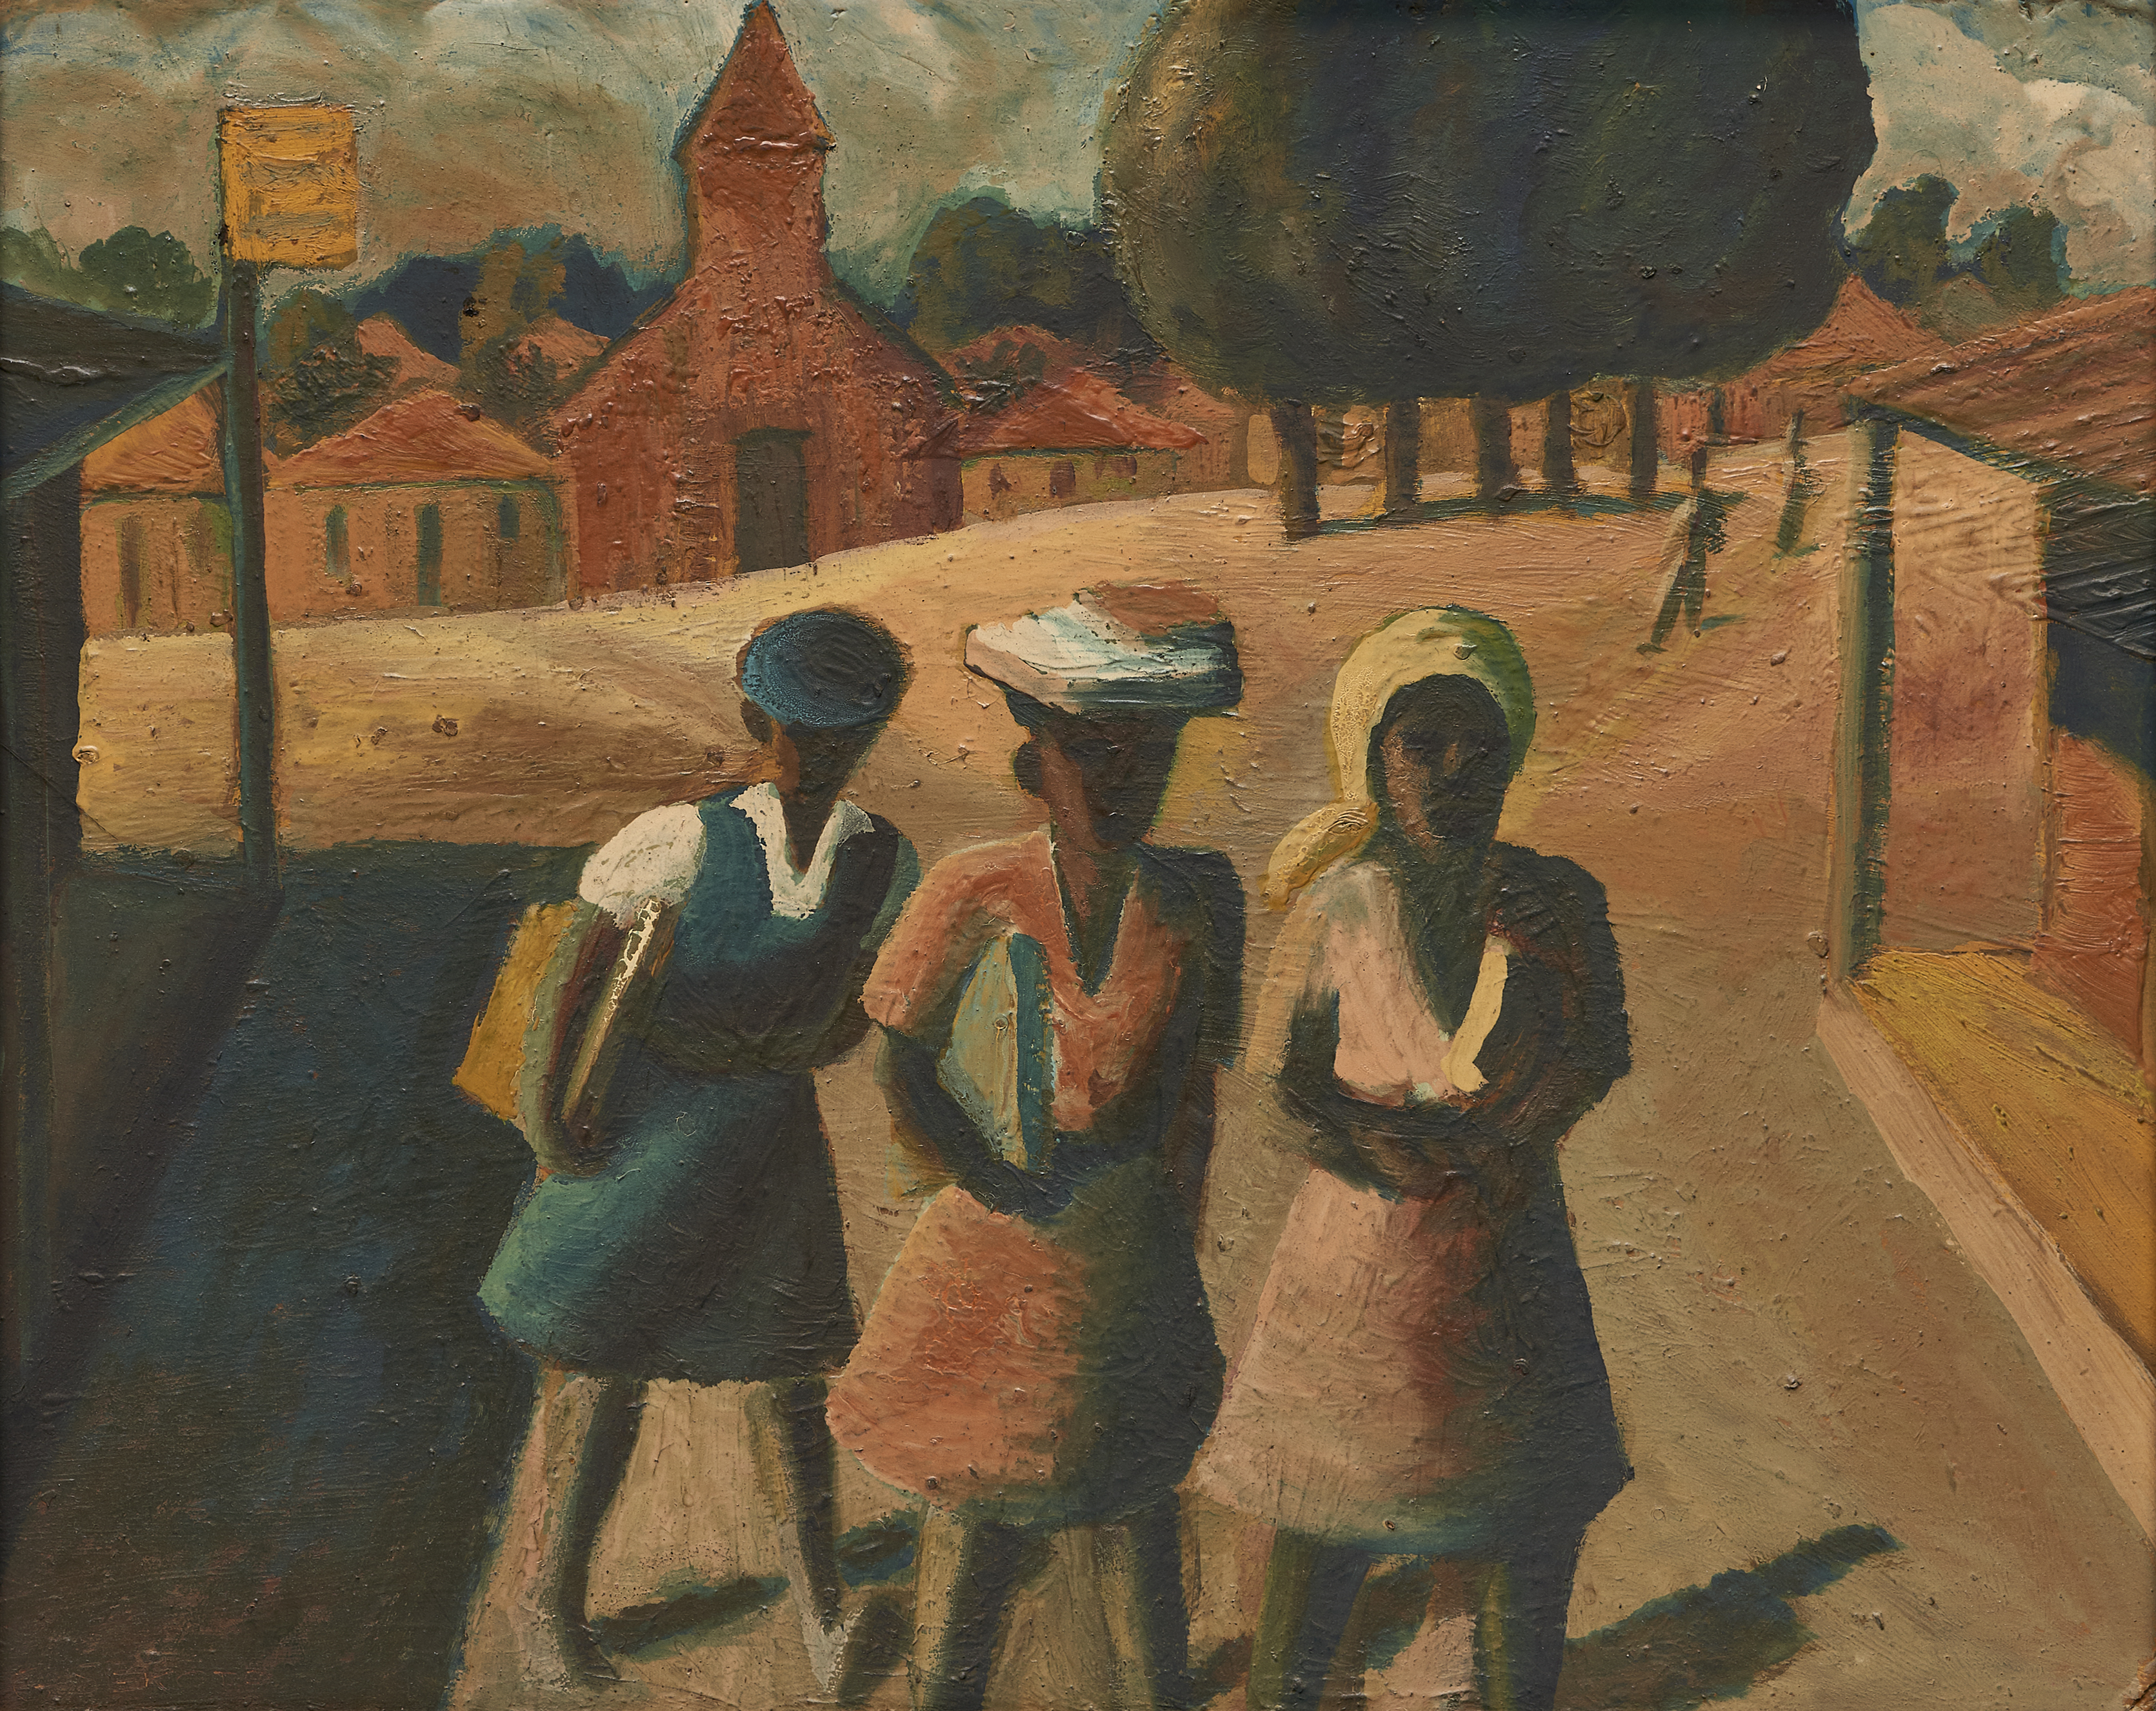 Three School Girls, painted in the 1940s by South African artist Gerard Sekoto.